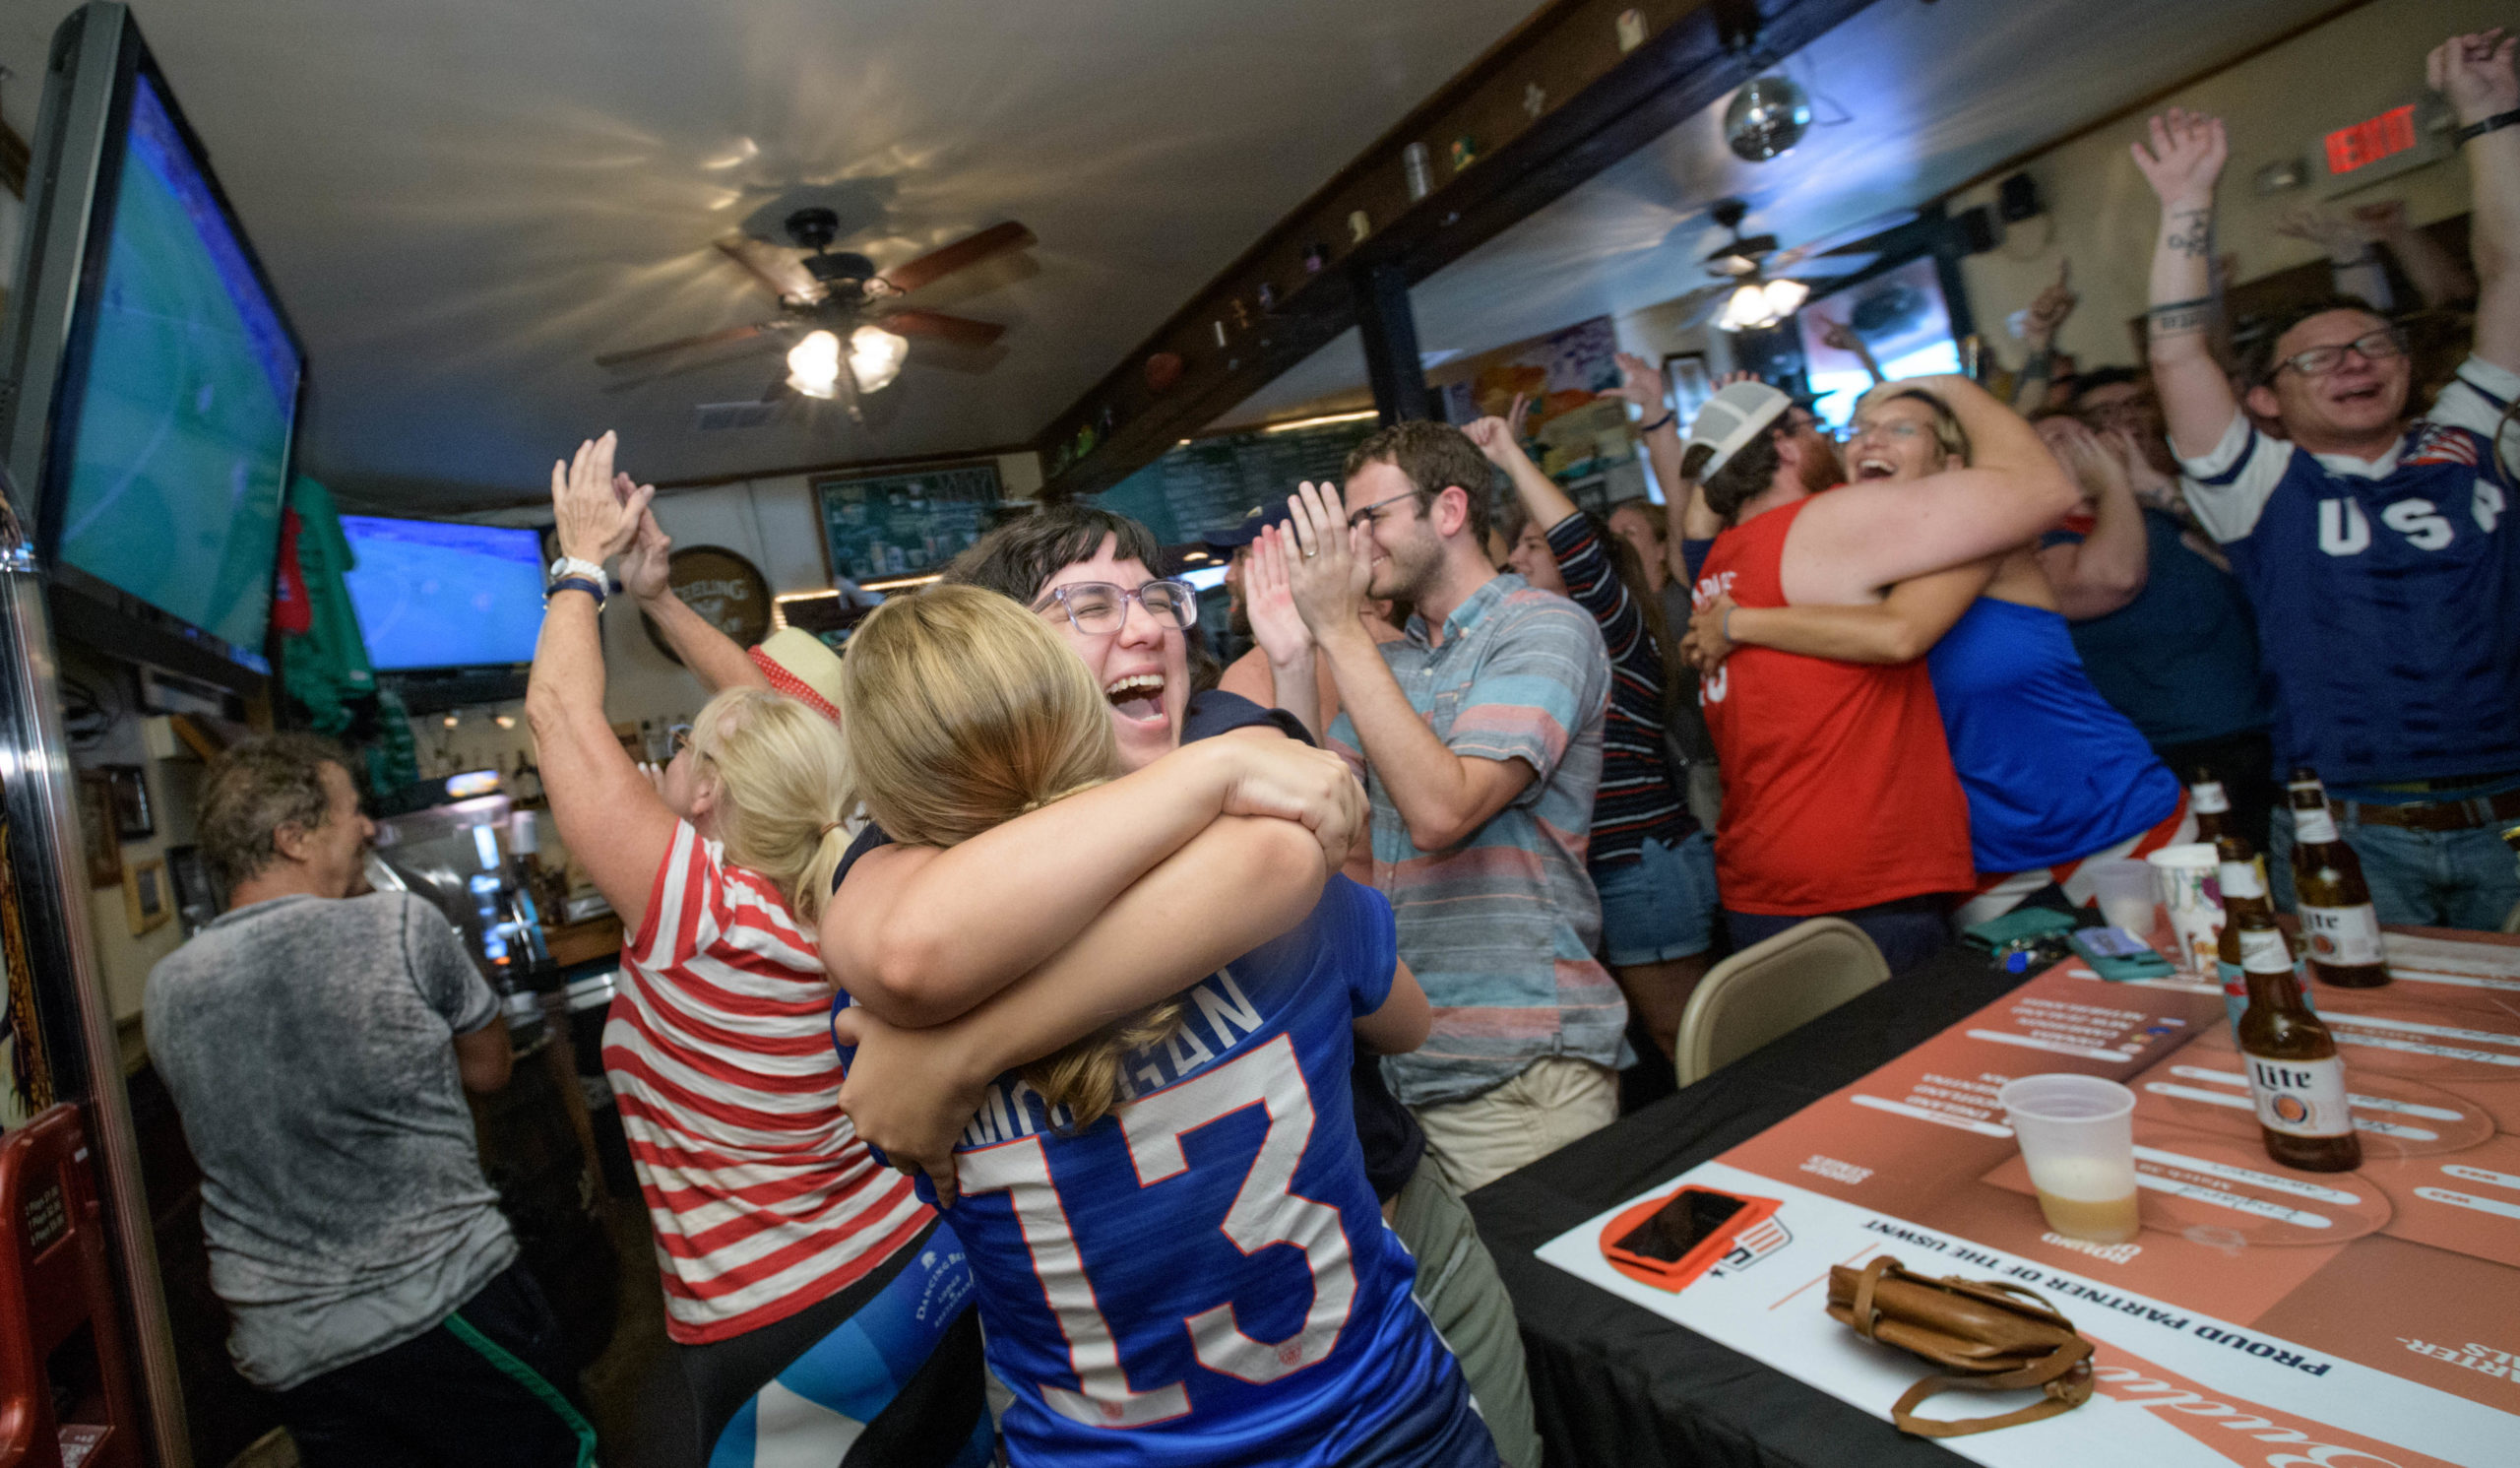 Patrons including Stephanie Oshrin, wearing Alex Morgan's #13 jersey, and Jessica Nicholls celebrate at Finn McCool's Irish Pub in the Mid-City neighborhood of New Orleans as the U.S. Women's National Soccer Team's completes a 2-0 victory over the Netherlands in the Women's World Cup in France Sunday, July 7, 2019. Photo by Matthew Hinton